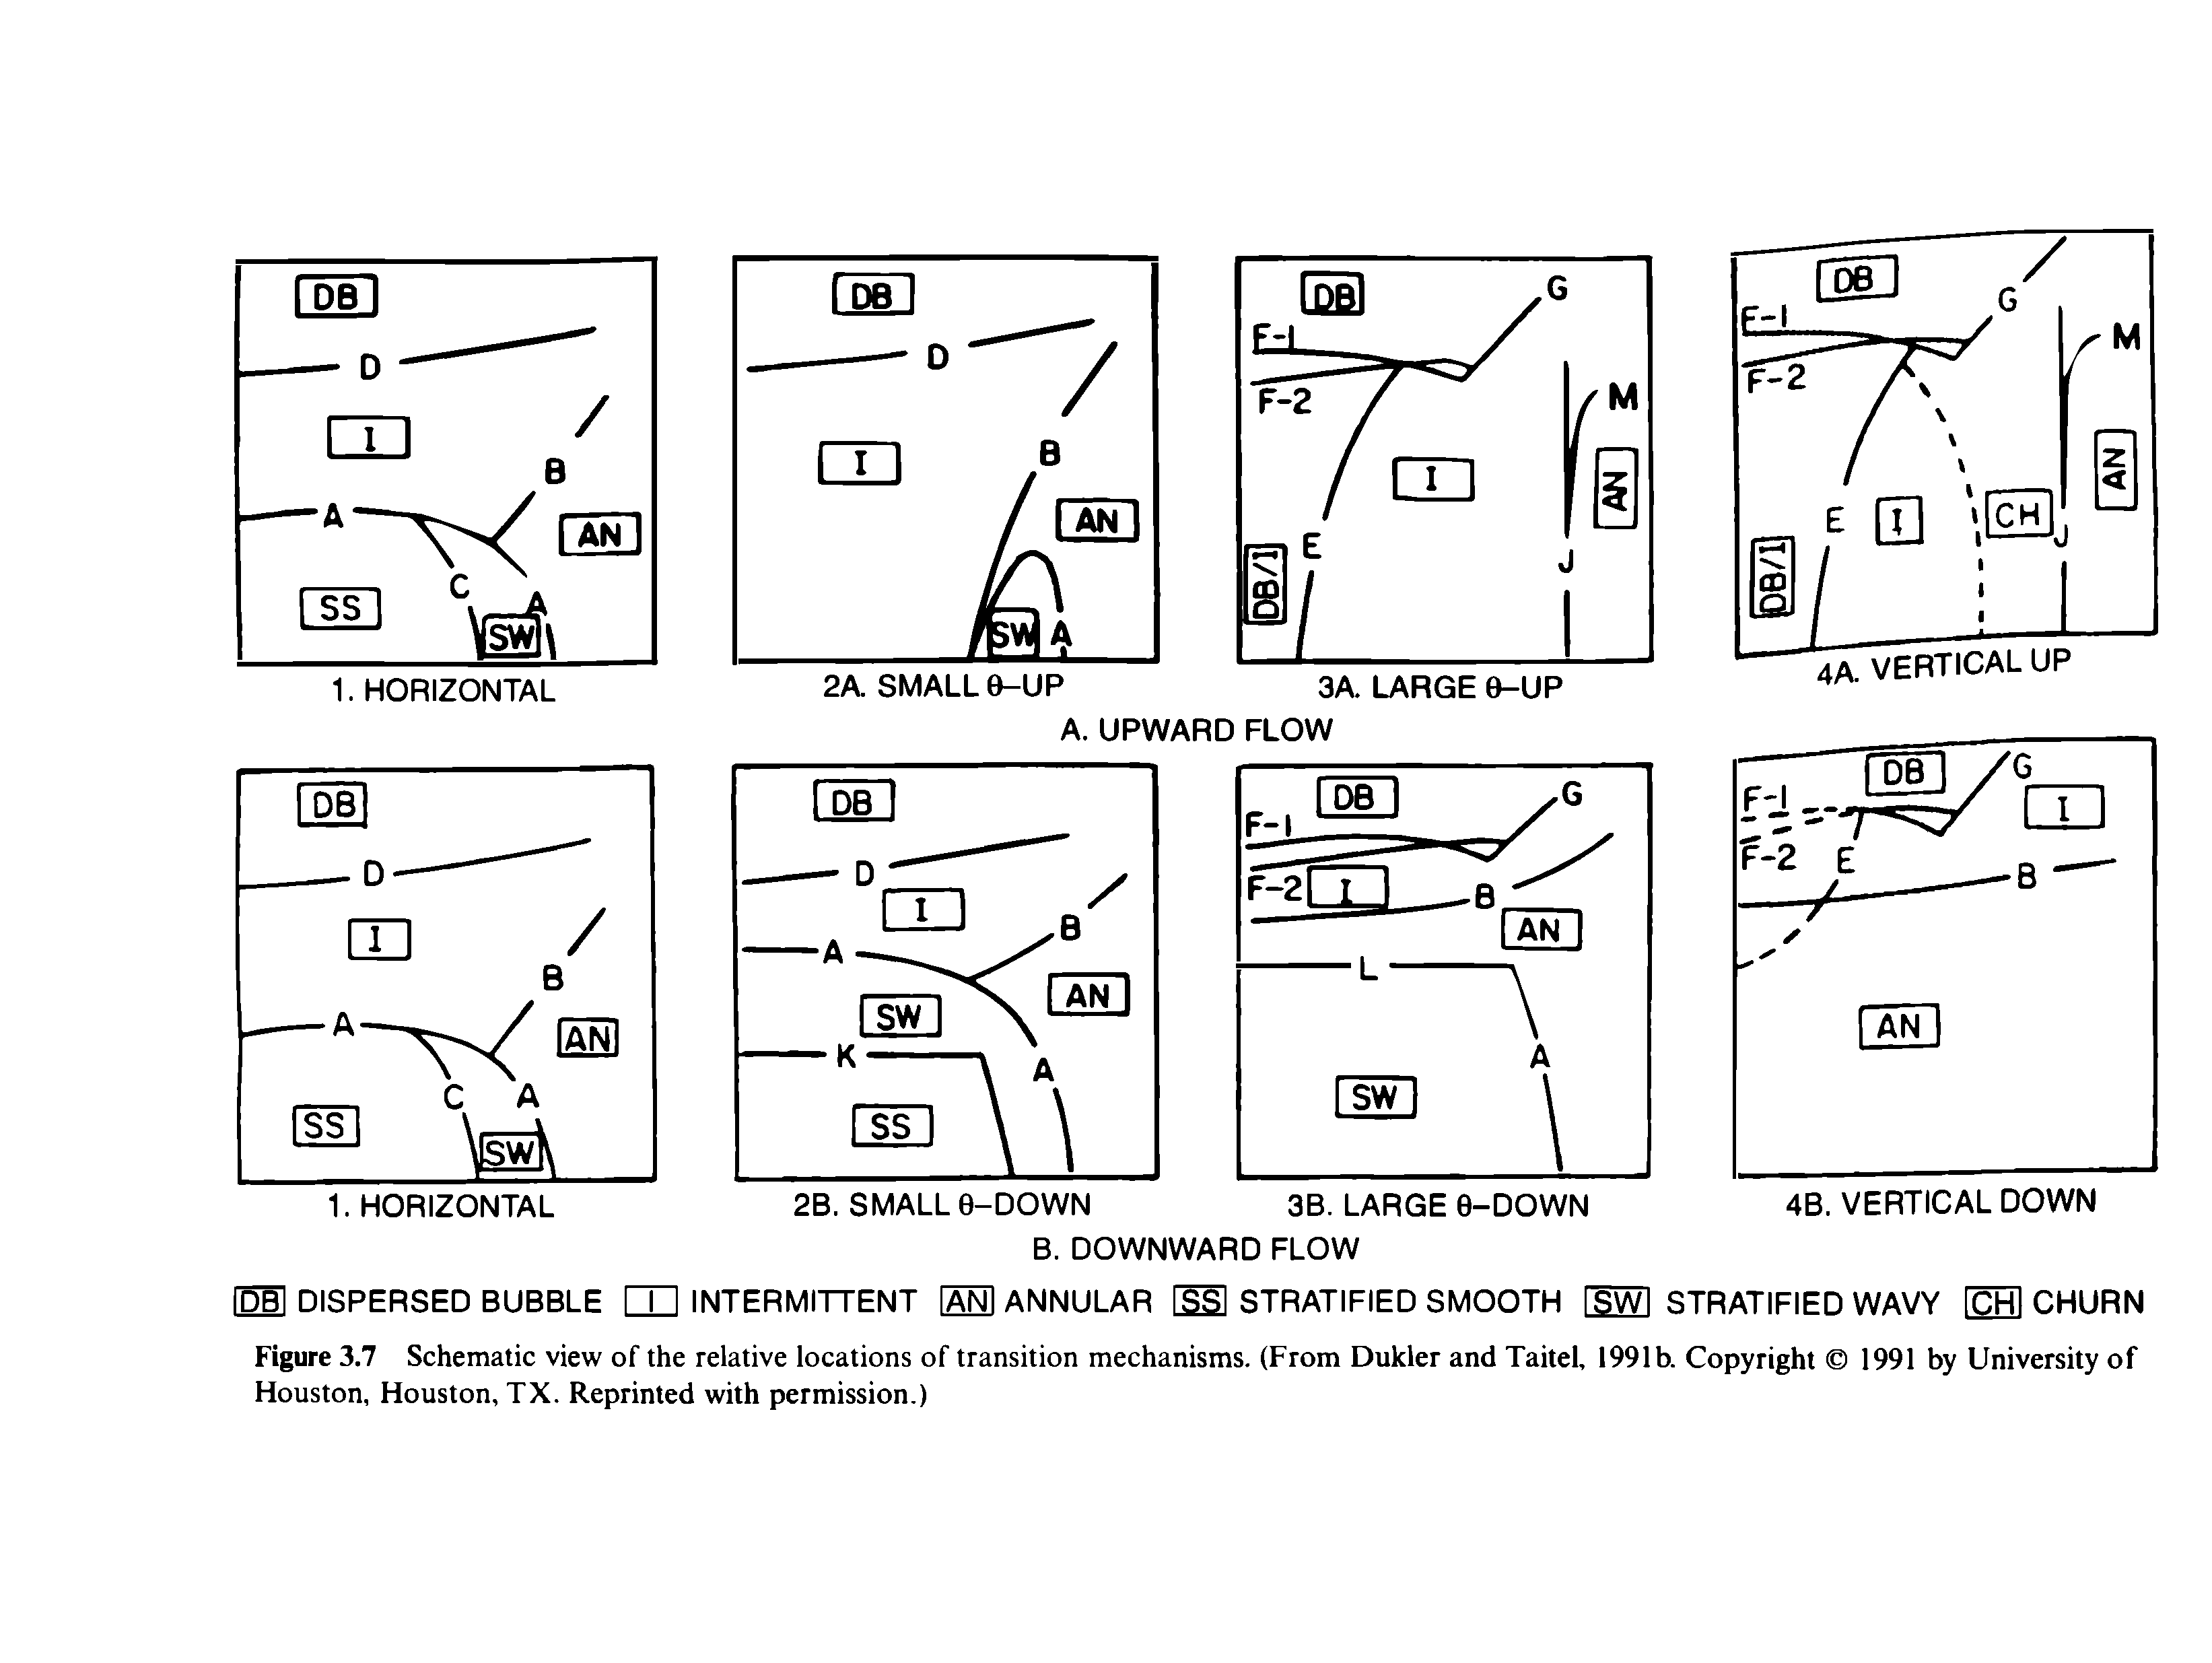 Figure 3.7 Schematic view of the relative locations of transition mechanisms. (From Dukler and Taitel, 1991b. Copyright 1991 by University of Houston, Houston, TX. Reprinted with permission.)...